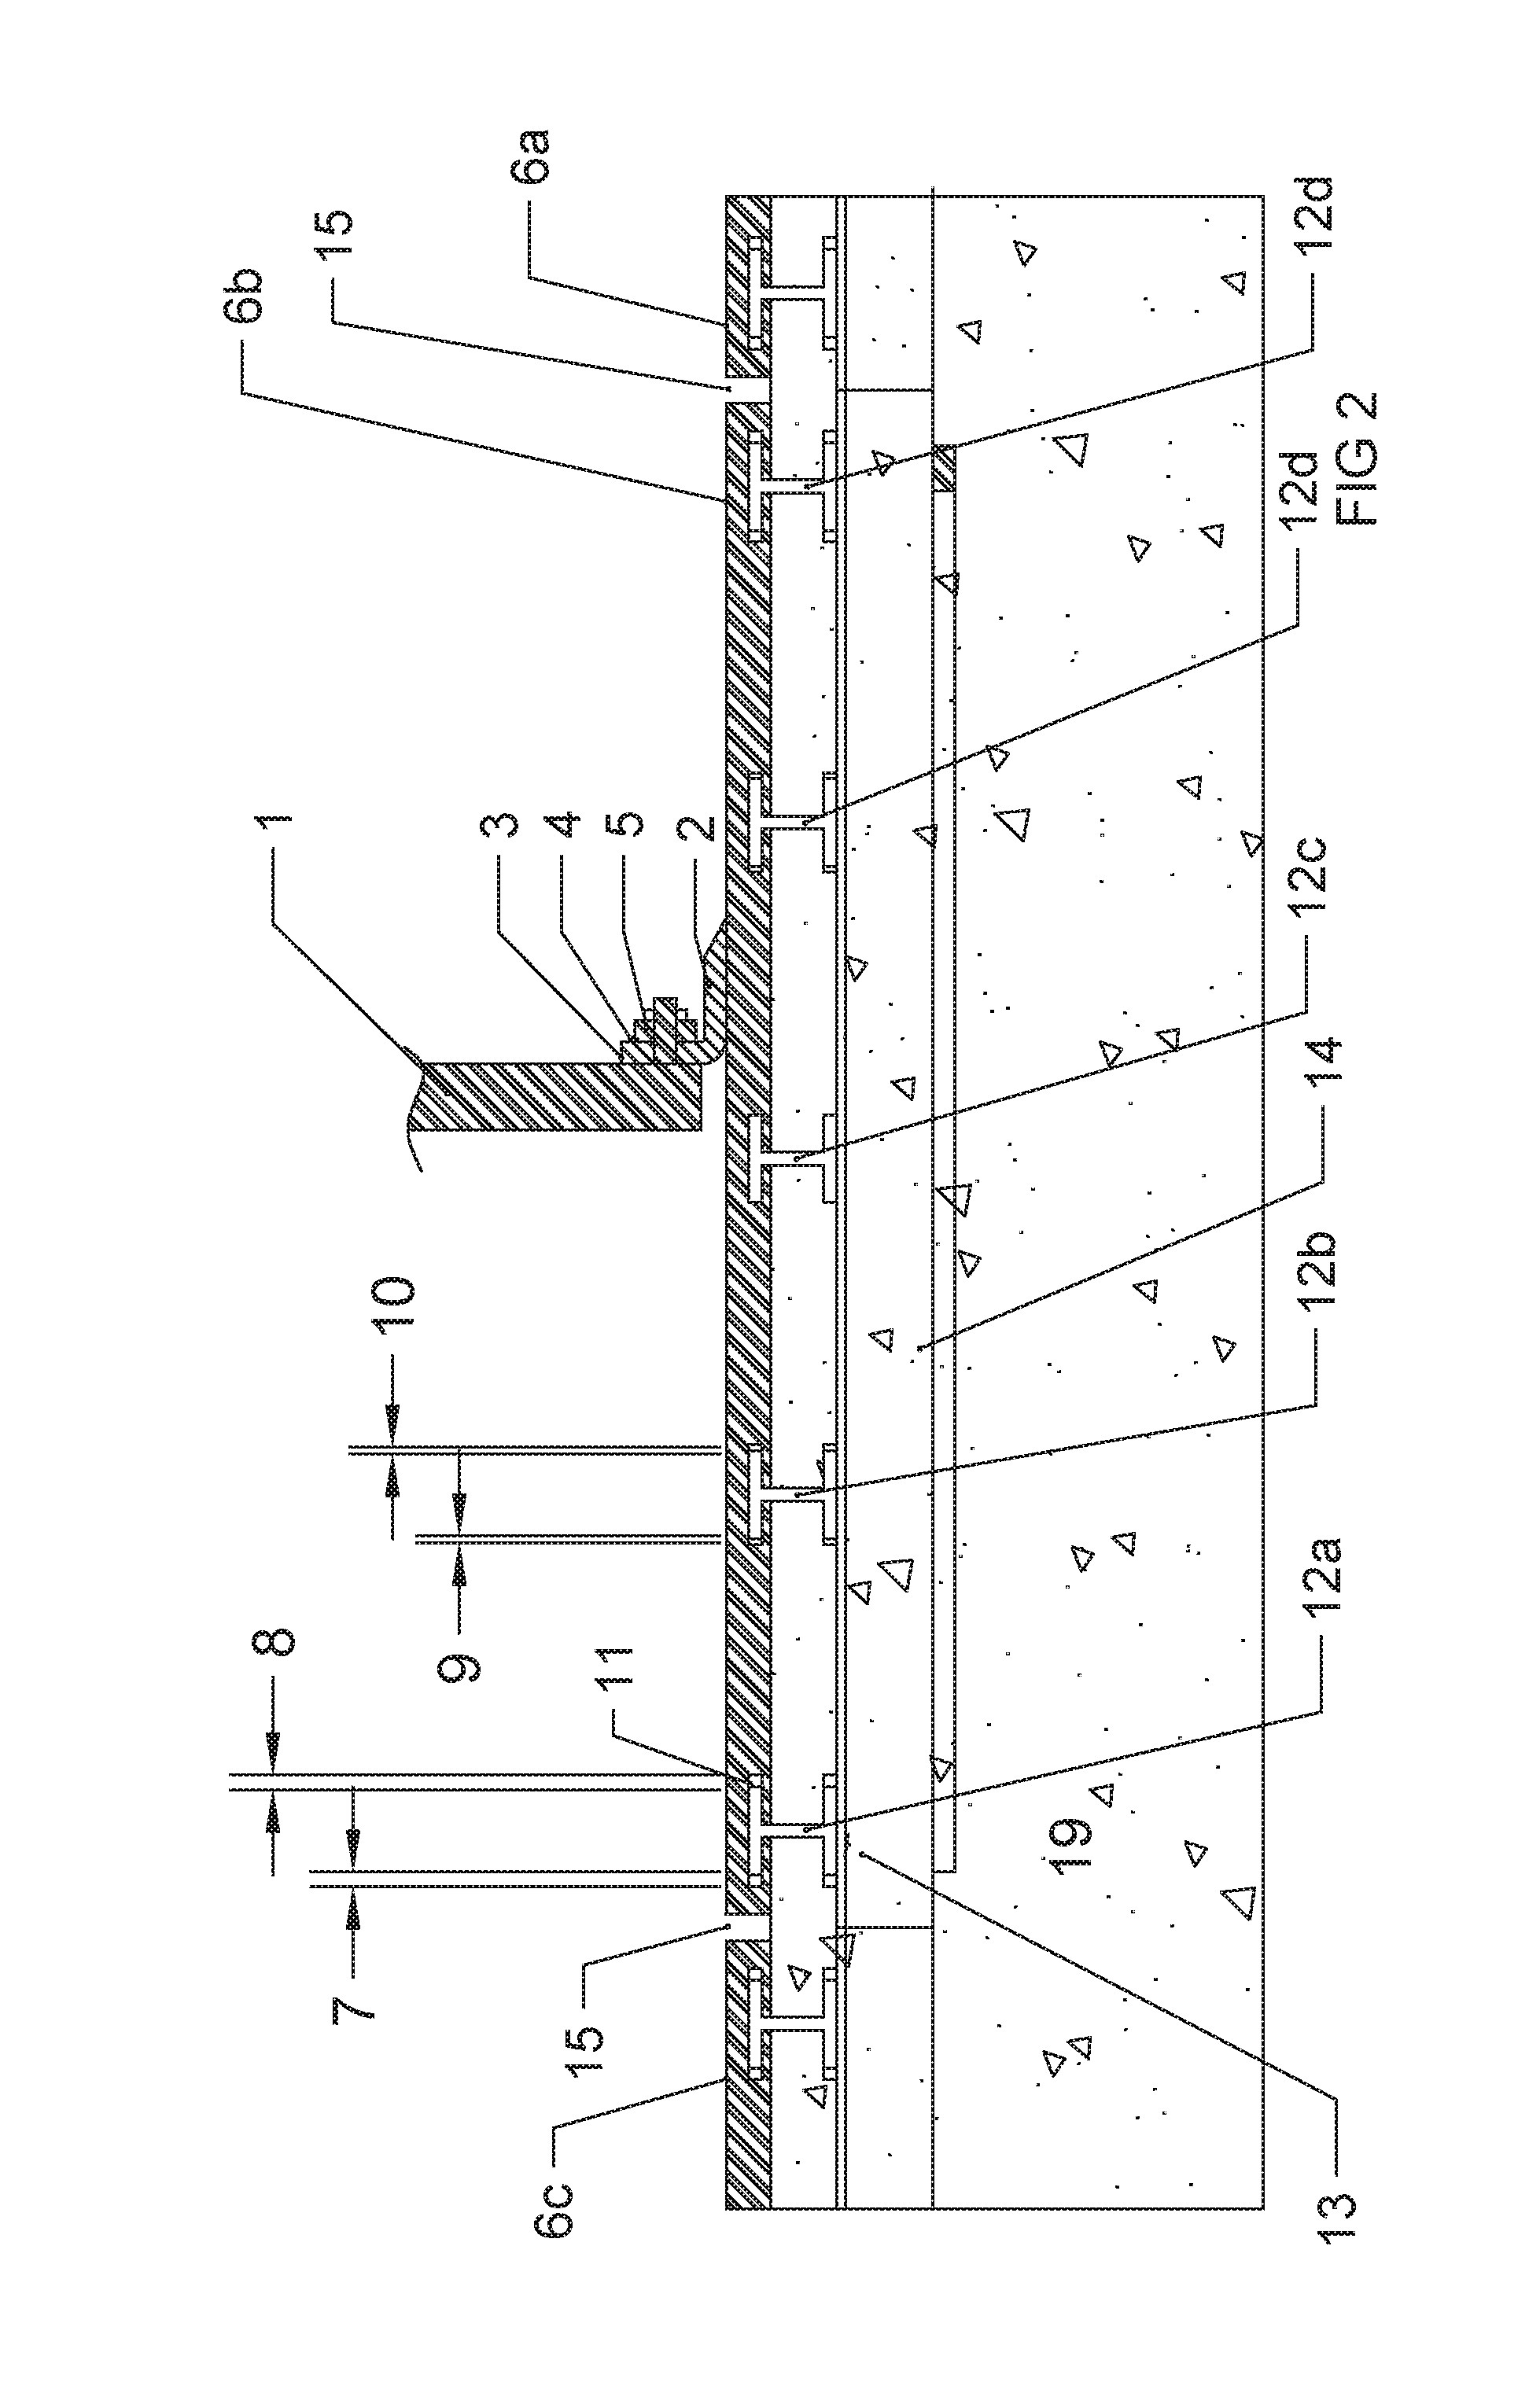 Abutment Plate for Water Control Gate